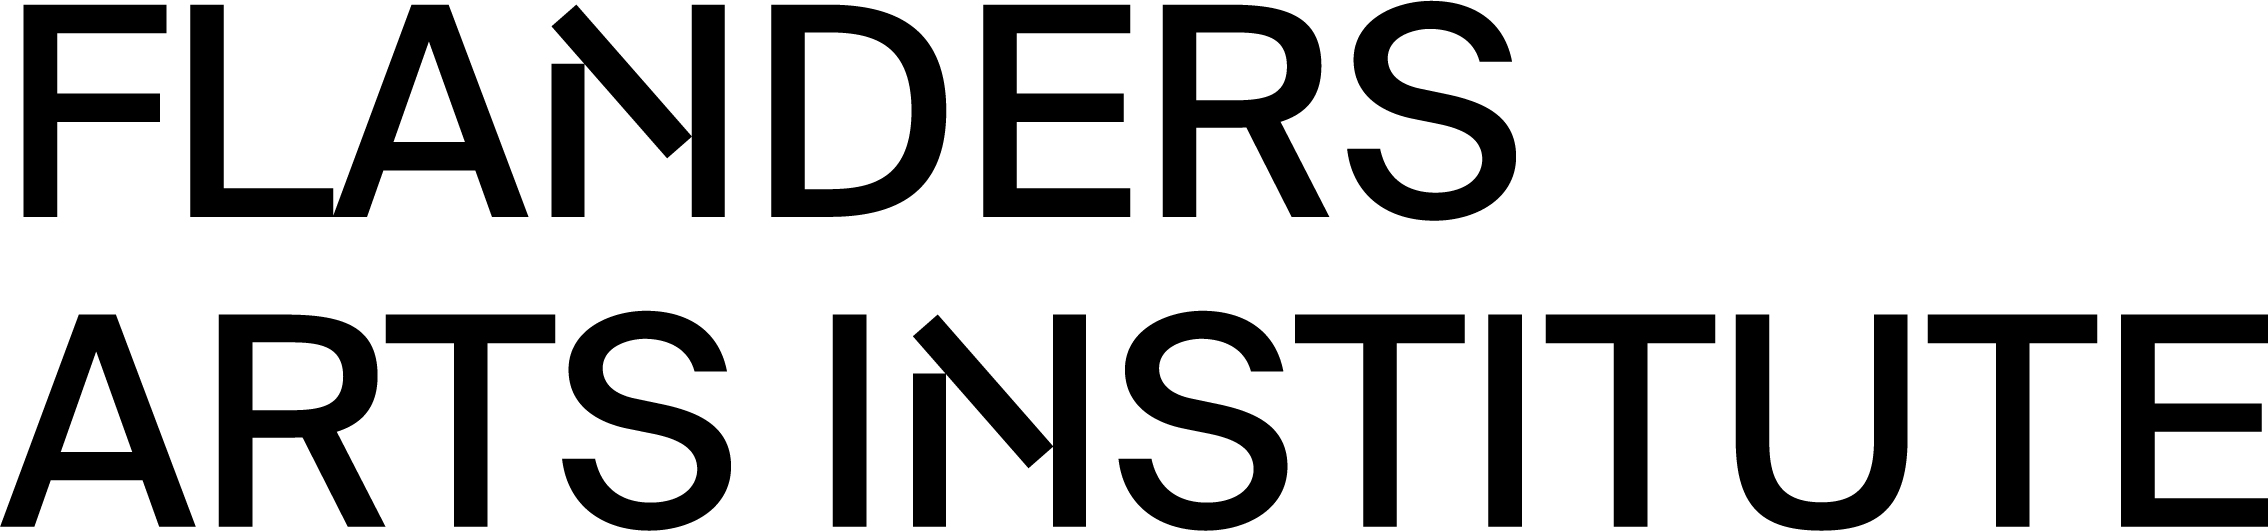 Flanders Arts Institute logo - name in black capitals. The two Ns are a bit broken up, bringing some style.